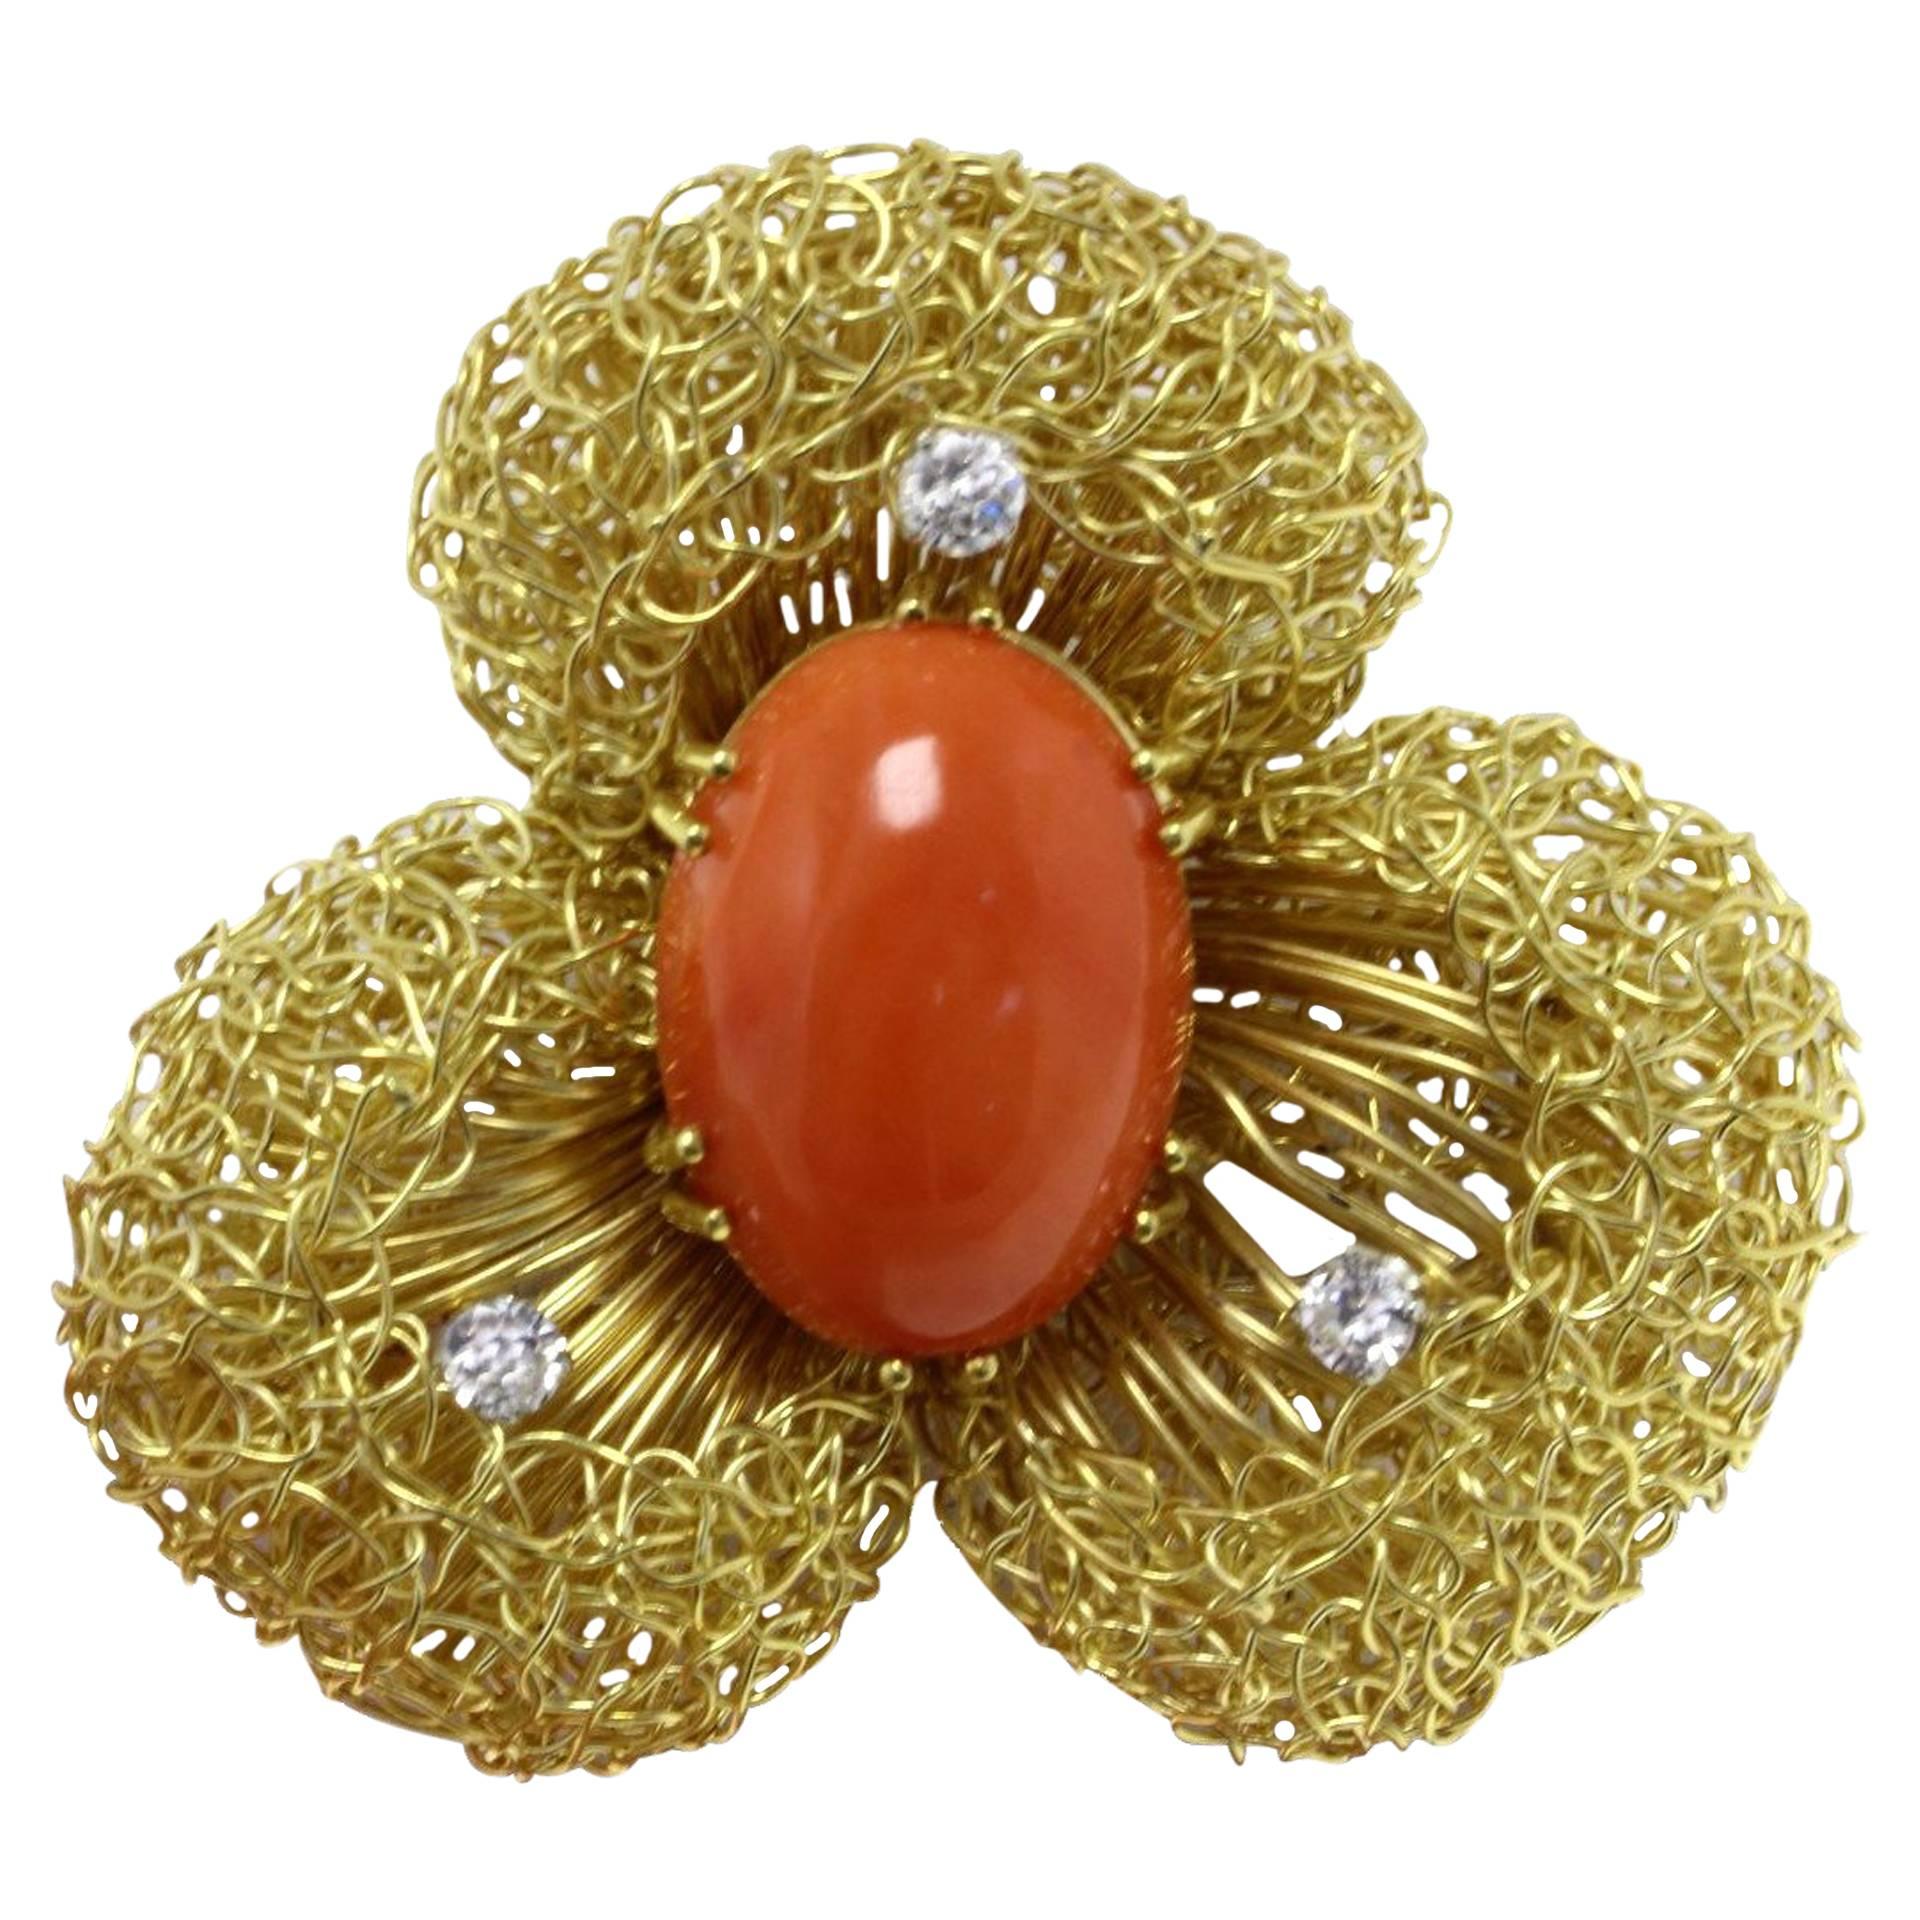 White Diamonds, Oval Shape Red Coral, 18K Yellow Gold Flower Design Brooch